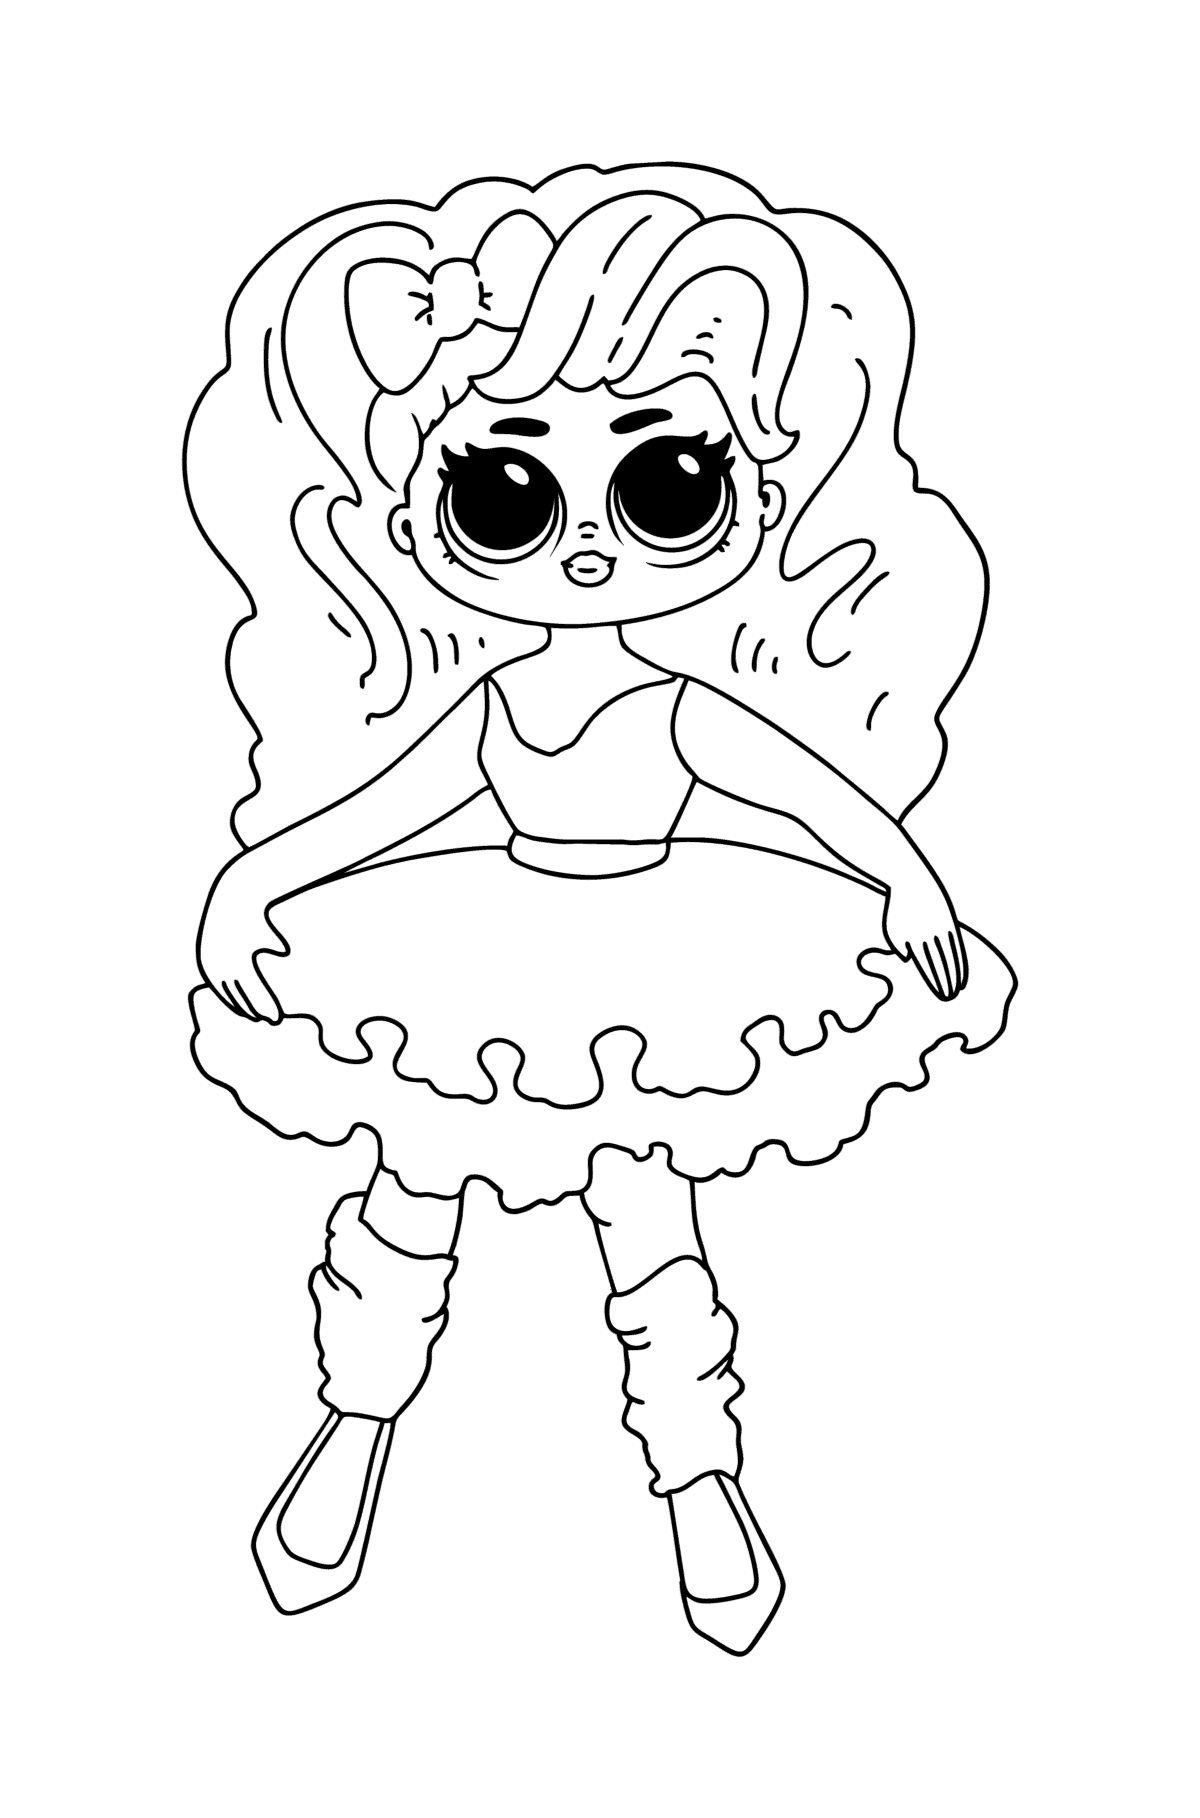 Coloring page LOL OMG Pink Baby - Coloring Pages for Kids